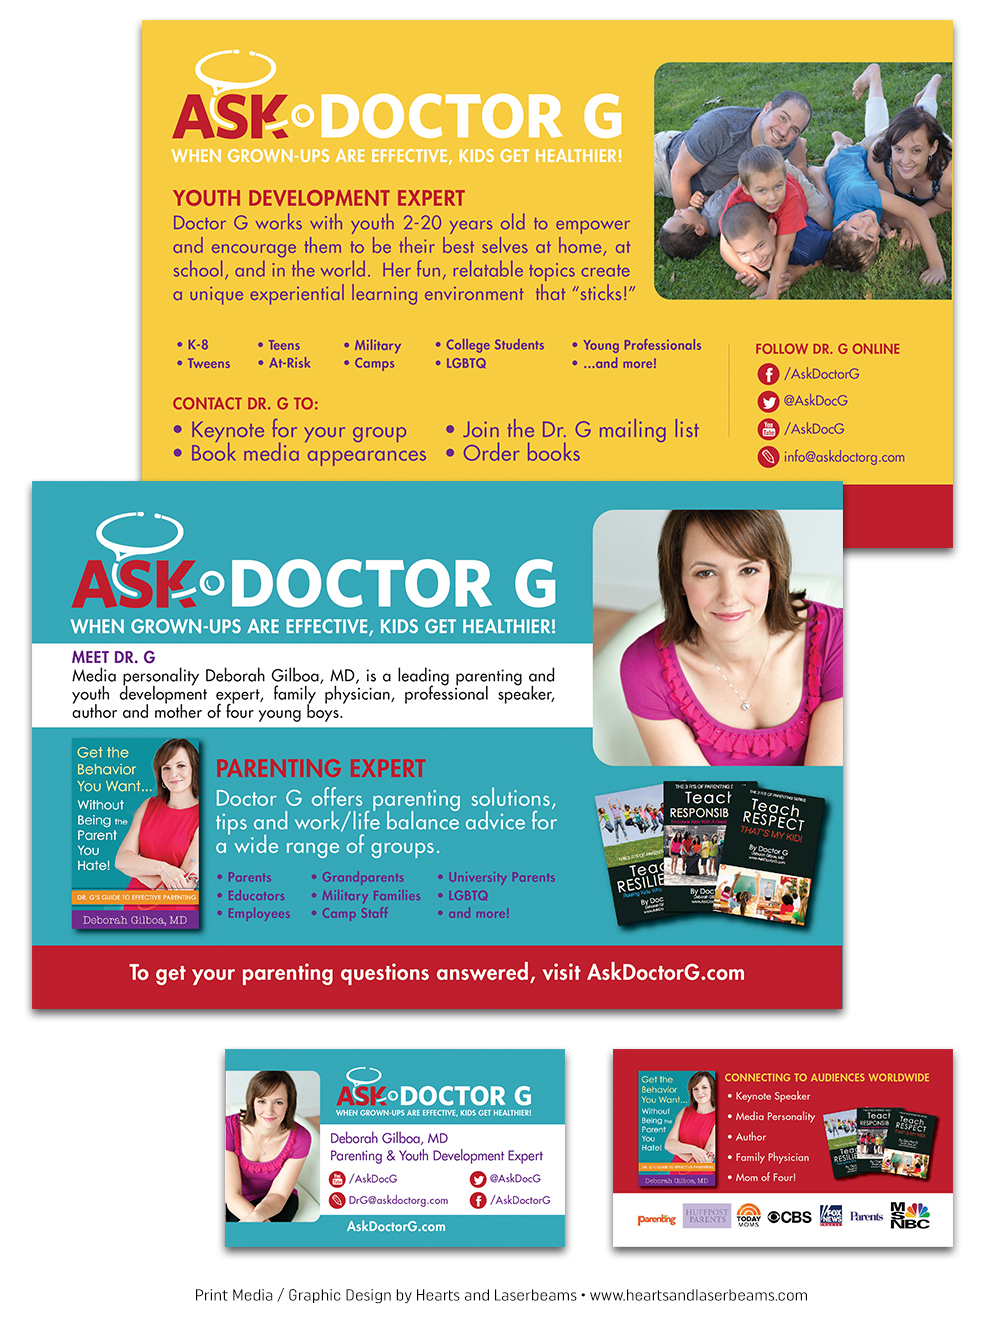 Print Media - Graphic Design Portfolio - Postcard and Business Card Design for Doctor G by Hearts and Laserbeams